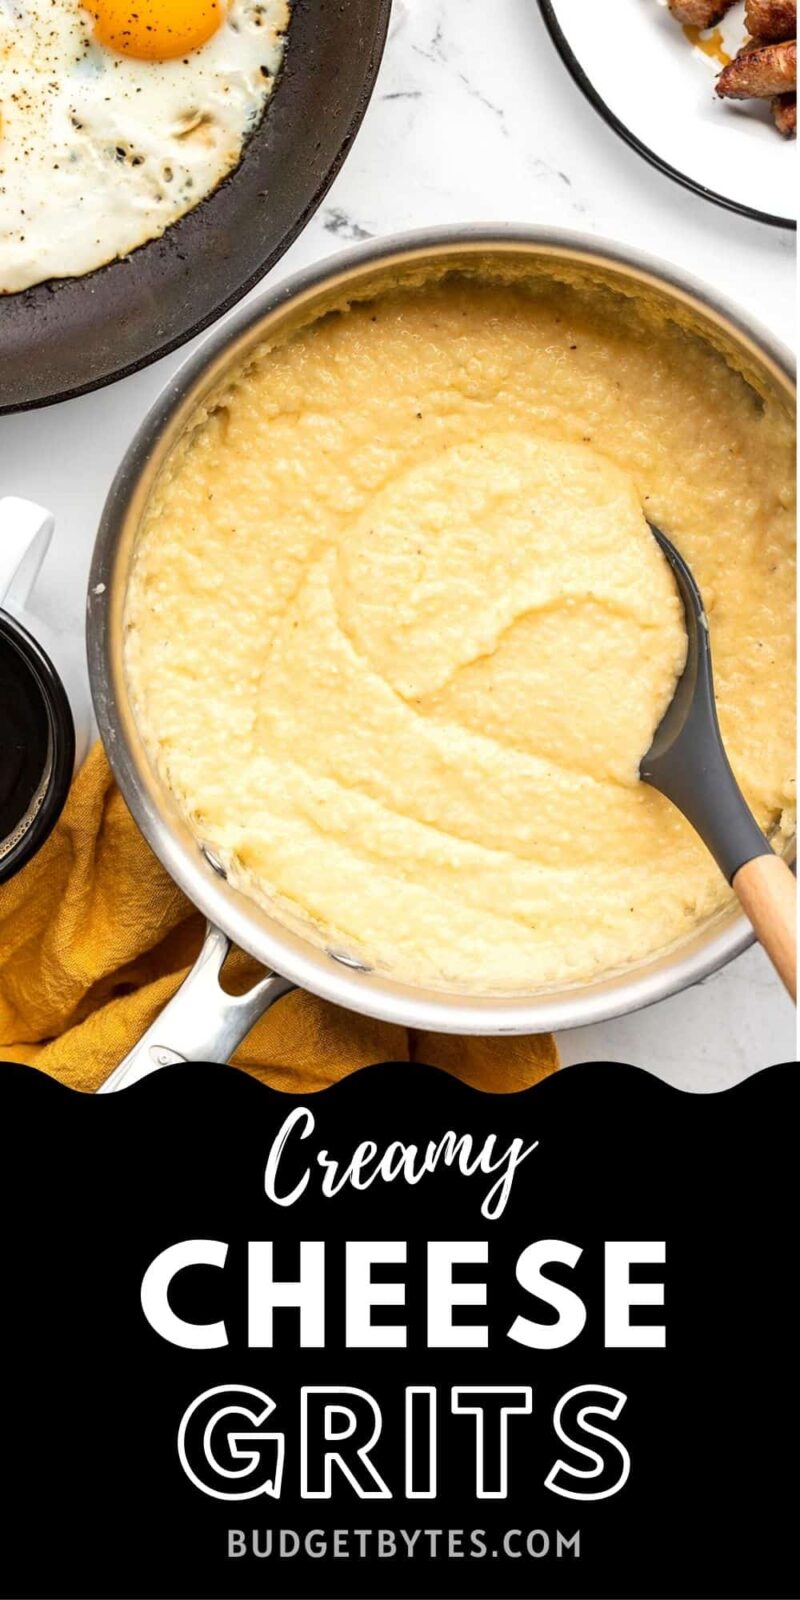 Cheese grits in a sauce pot with spoon, title text at the bottom